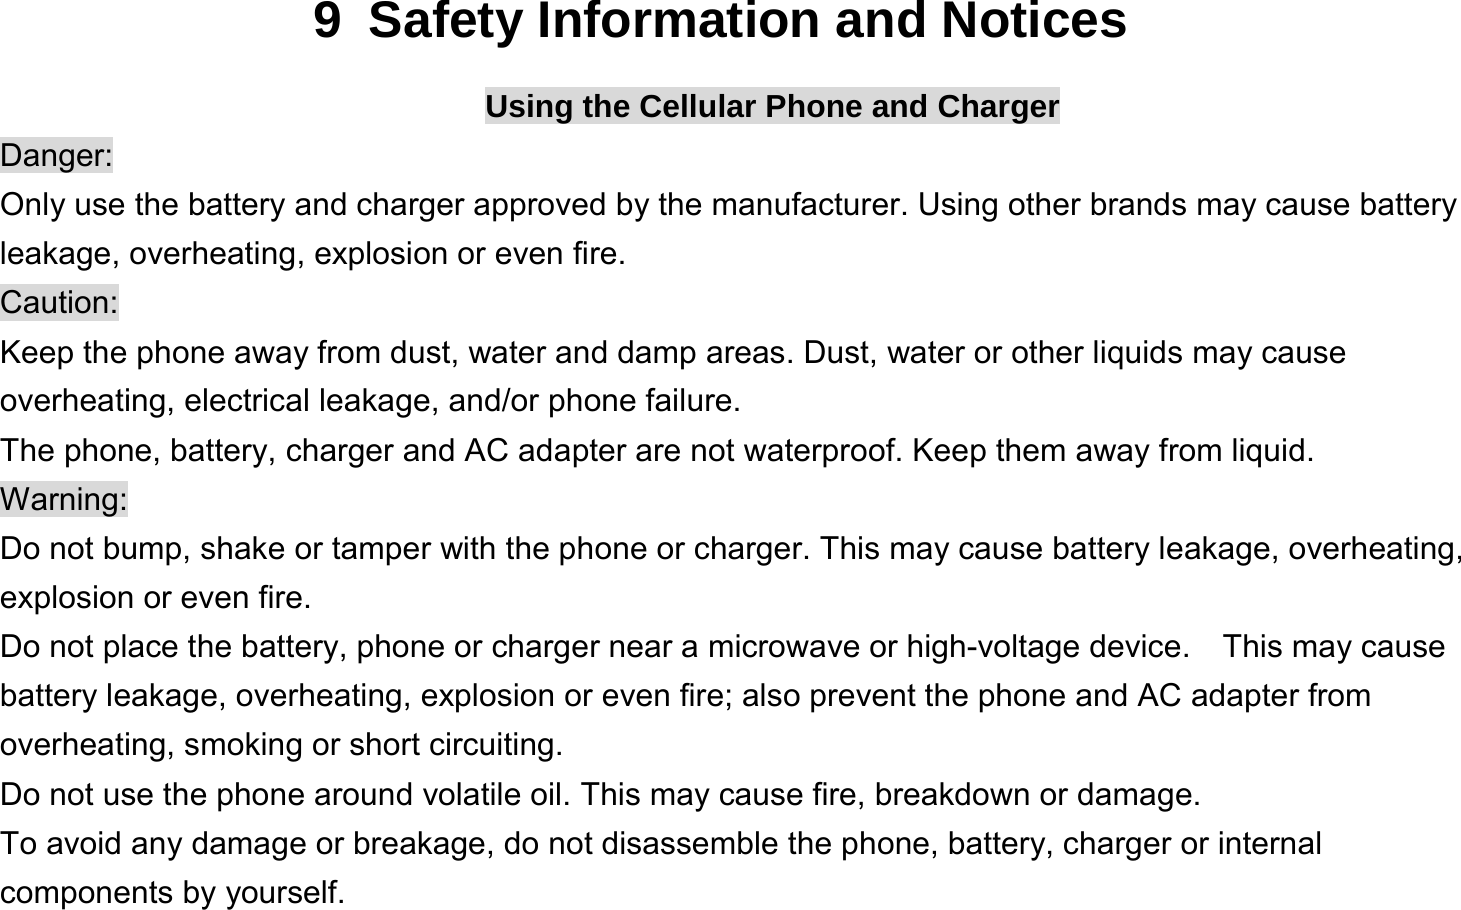  9  Safety Information and Notices Using the Cellular Phone and Charger Danger: Only use the battery and charger approved by the manufacturer. Using other brands may cause battery leakage, overheating, explosion or even fire. Caution: Keep the phone away from dust, water and damp areas. Dust, water or other liquids may cause overheating, electrical leakage, and/or phone failure.   The phone, battery, charger and AC adapter are not waterproof. Keep them away from liquid. Warning: Do not bump, shake or tamper with the phone or charger. This may cause battery leakage, overheating, explosion or even fire. Do not place the battery, phone or charger near a microwave or high-voltage device.  This may cause battery leakage, overheating, explosion or even fire; also prevent the phone and AC adapter from overheating, smoking or short circuiting. Do not use the phone around volatile oil. This may cause fire, breakdown or damage. To avoid any damage or breakage, do not disassemble the phone, battery, charger or internal components by yourself. 